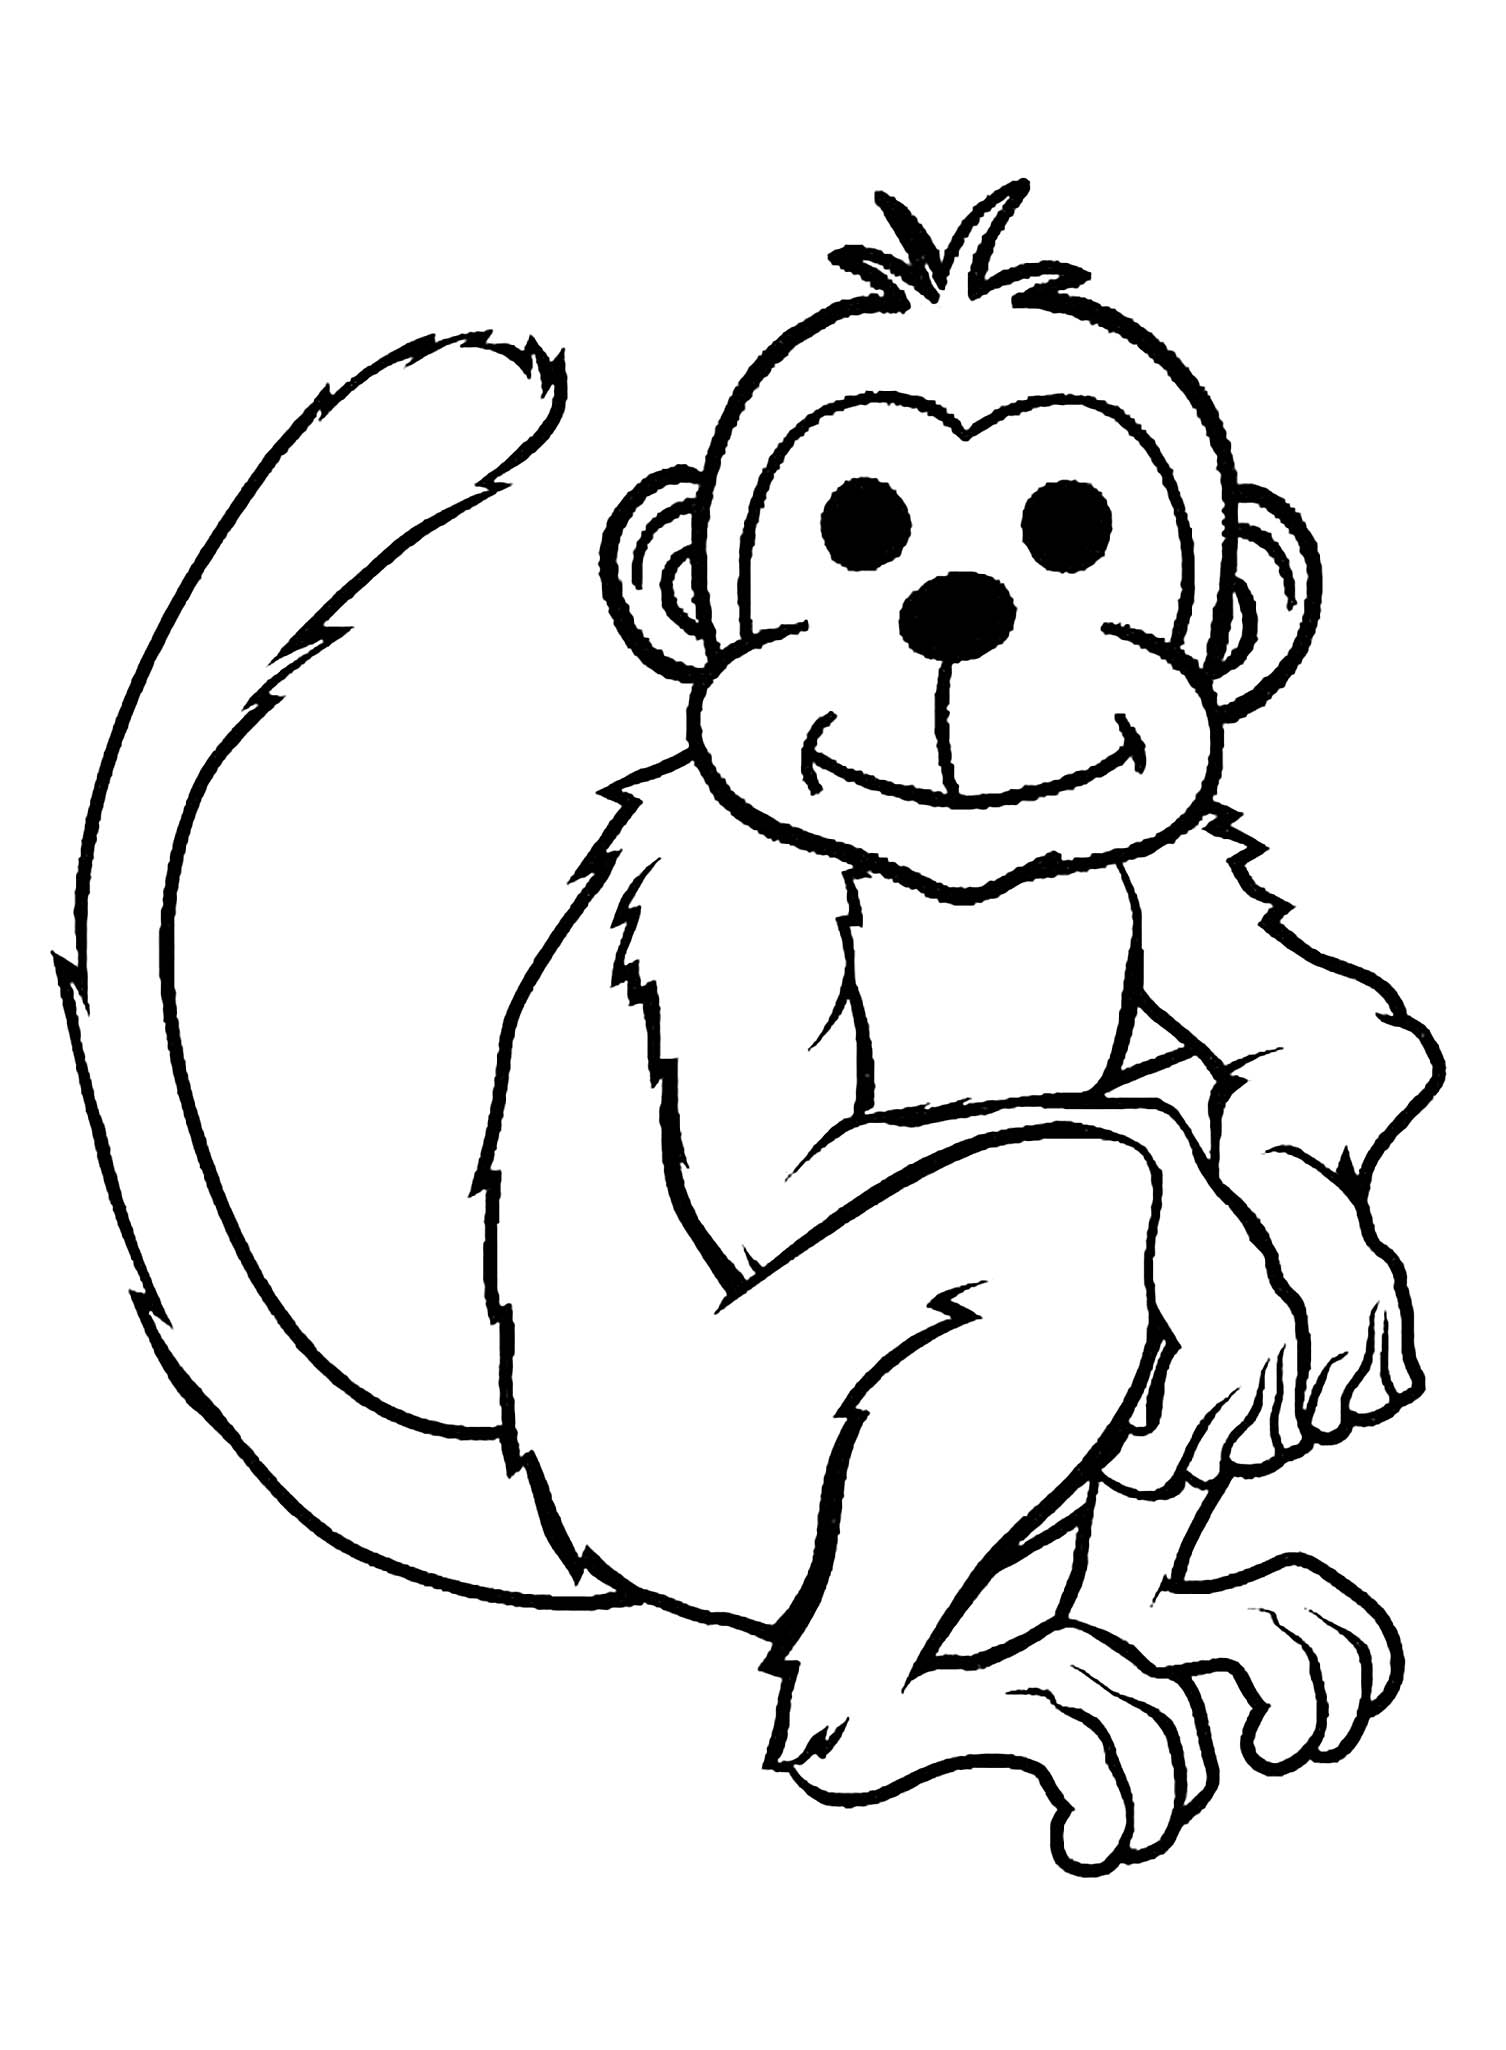 Monkeys to download Monkeys Kids Coloring Pages